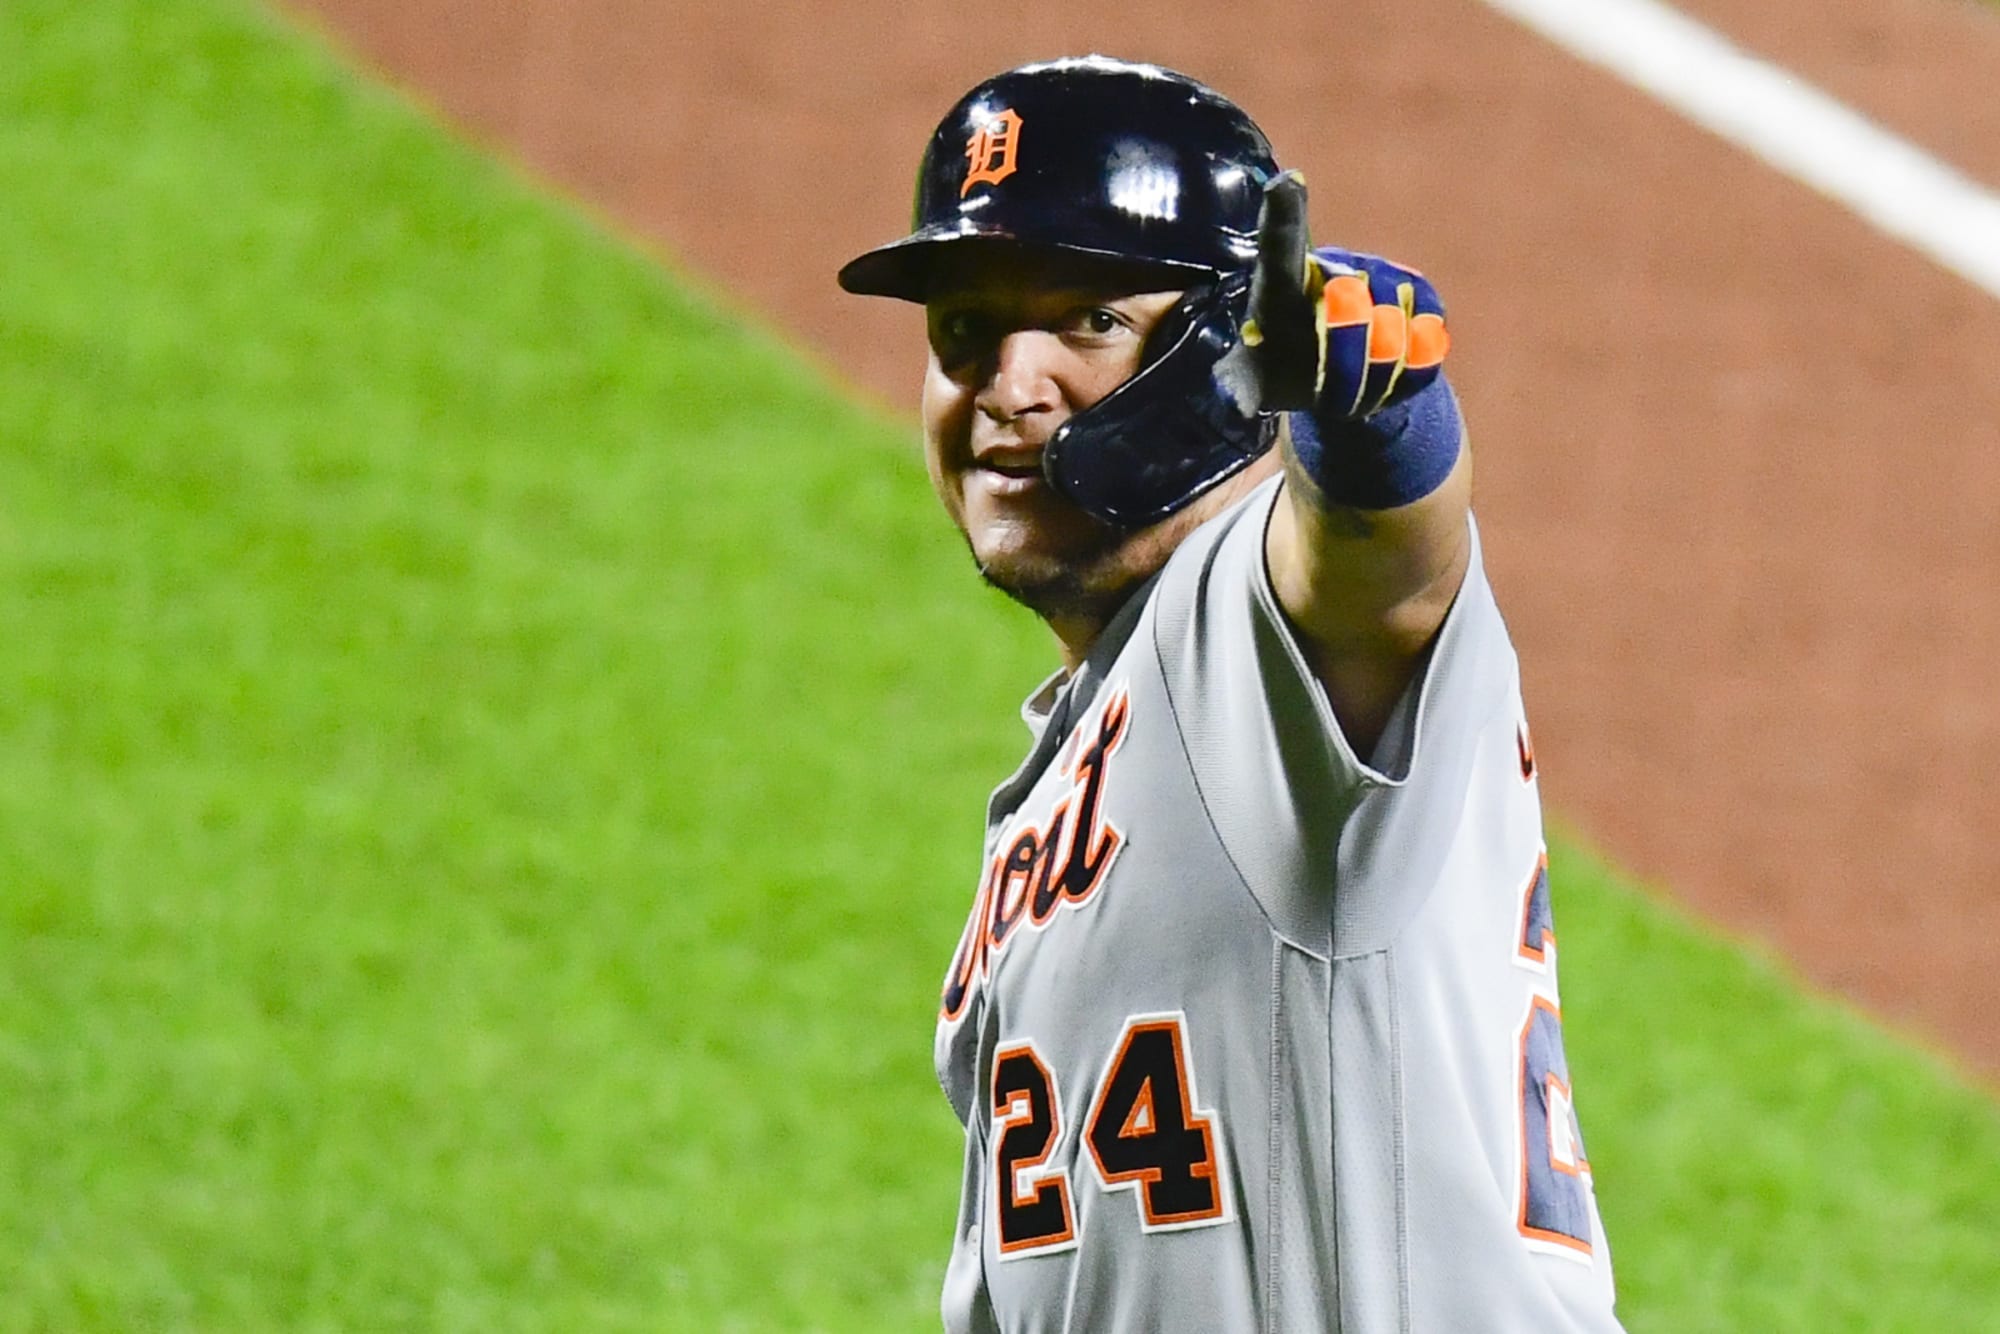 Who will be next player to reach 500 home runs after Miguel Cabrera?